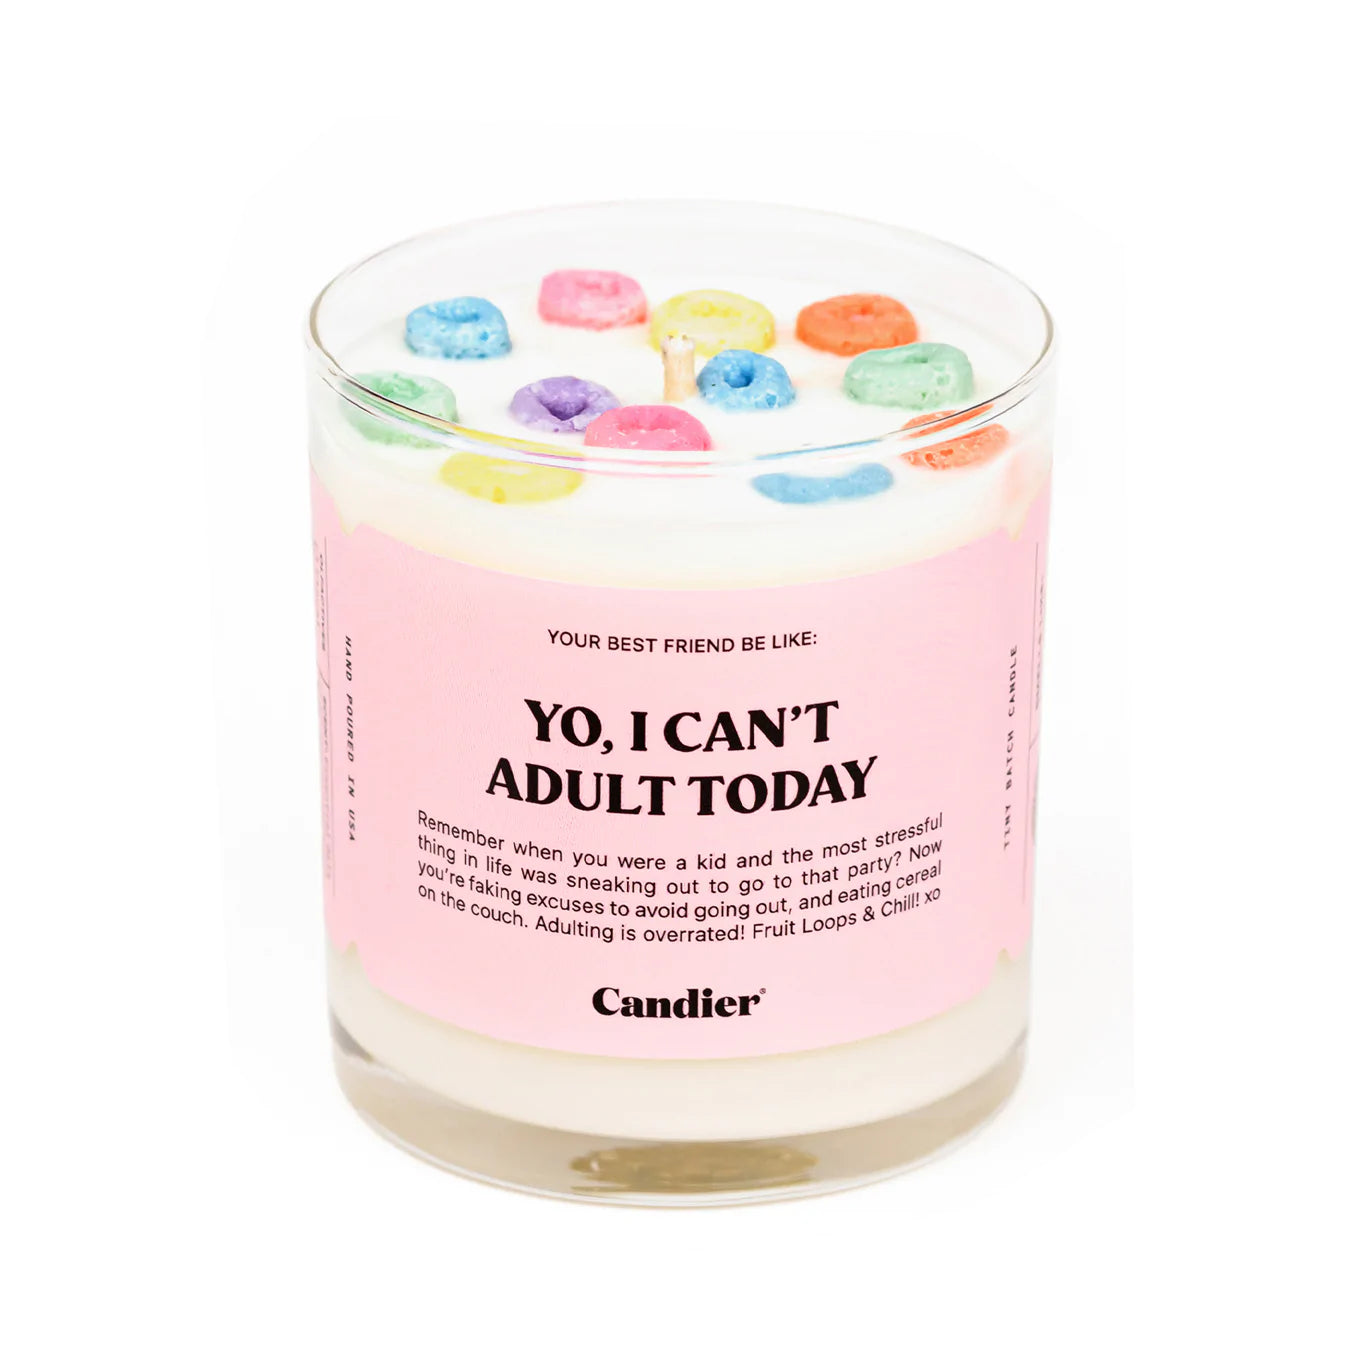 Can't Candle